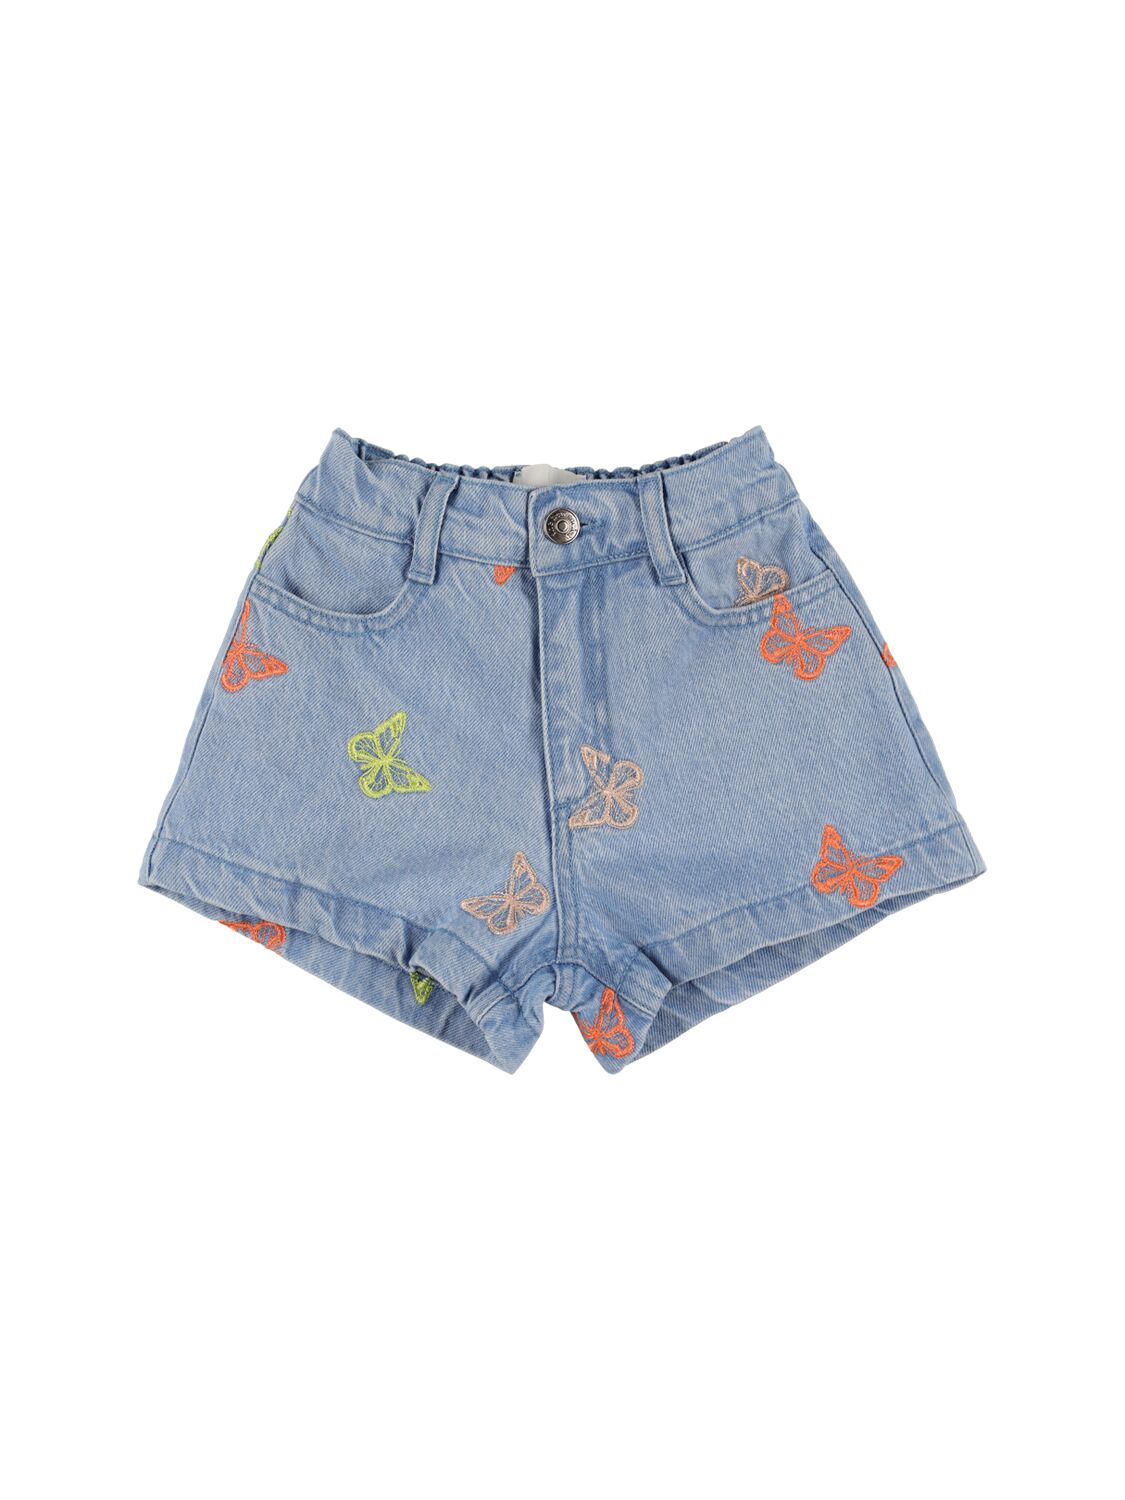 Image of Embroidered Cotton Chambray Shorts